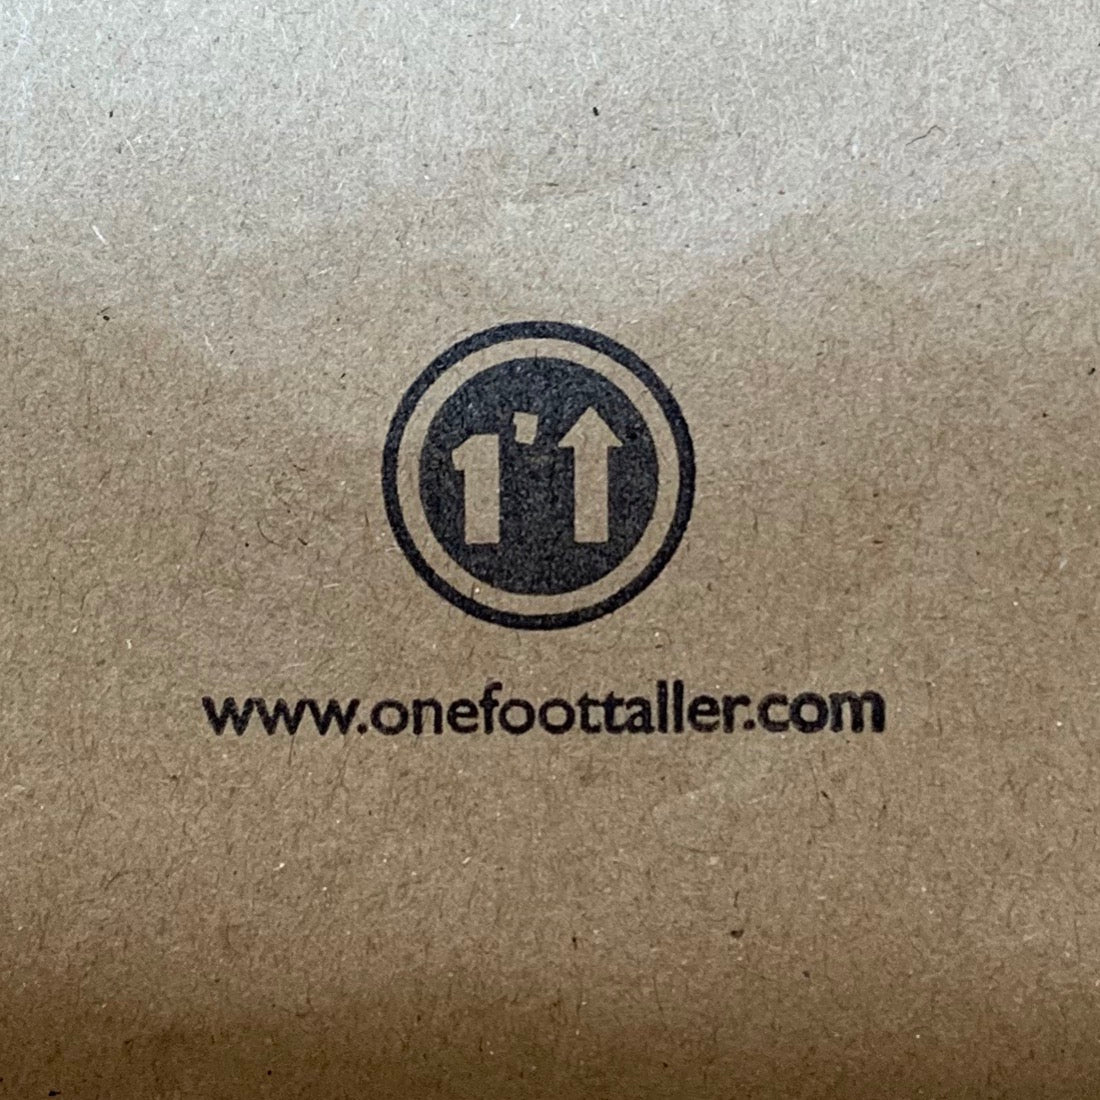 One Foot Taller Gift Card